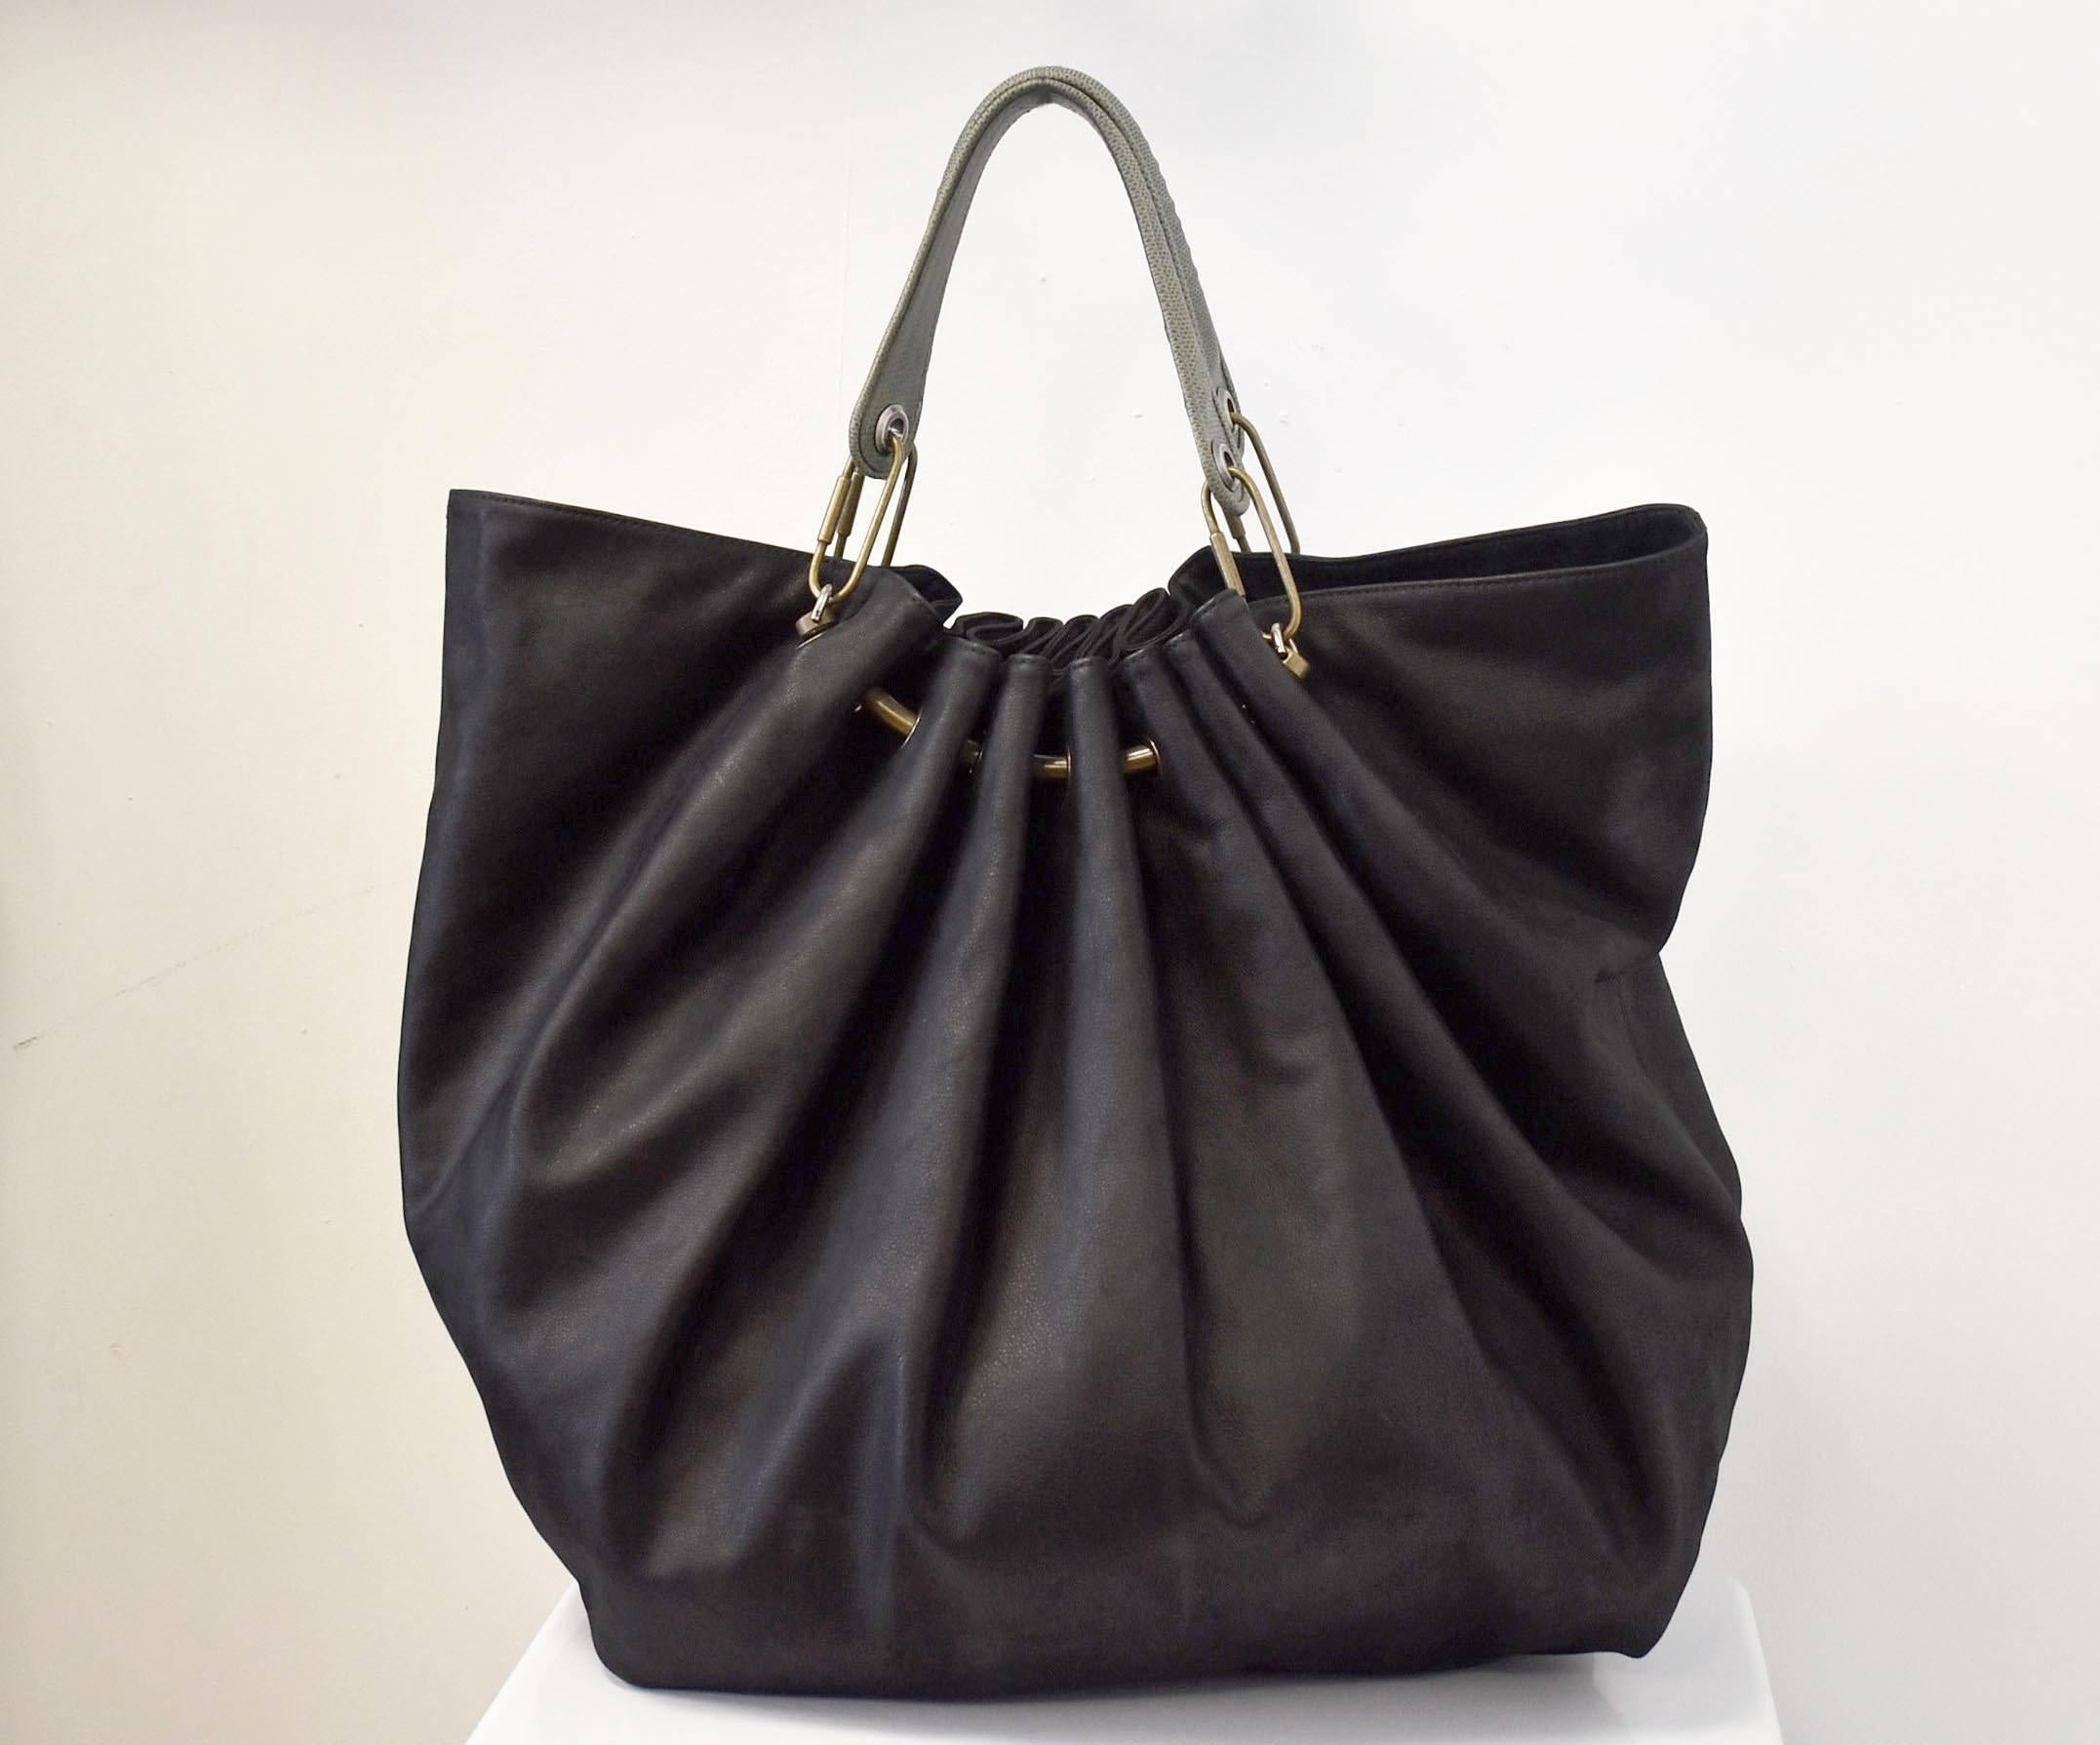 A luxurious black oversize leather handbag from French design house Lanvin. The ‘sack’ shaped handbag has two green leather handles and brass rivets and hardware across the opening that creates soft pleats in the body of the bag. The beautiful and